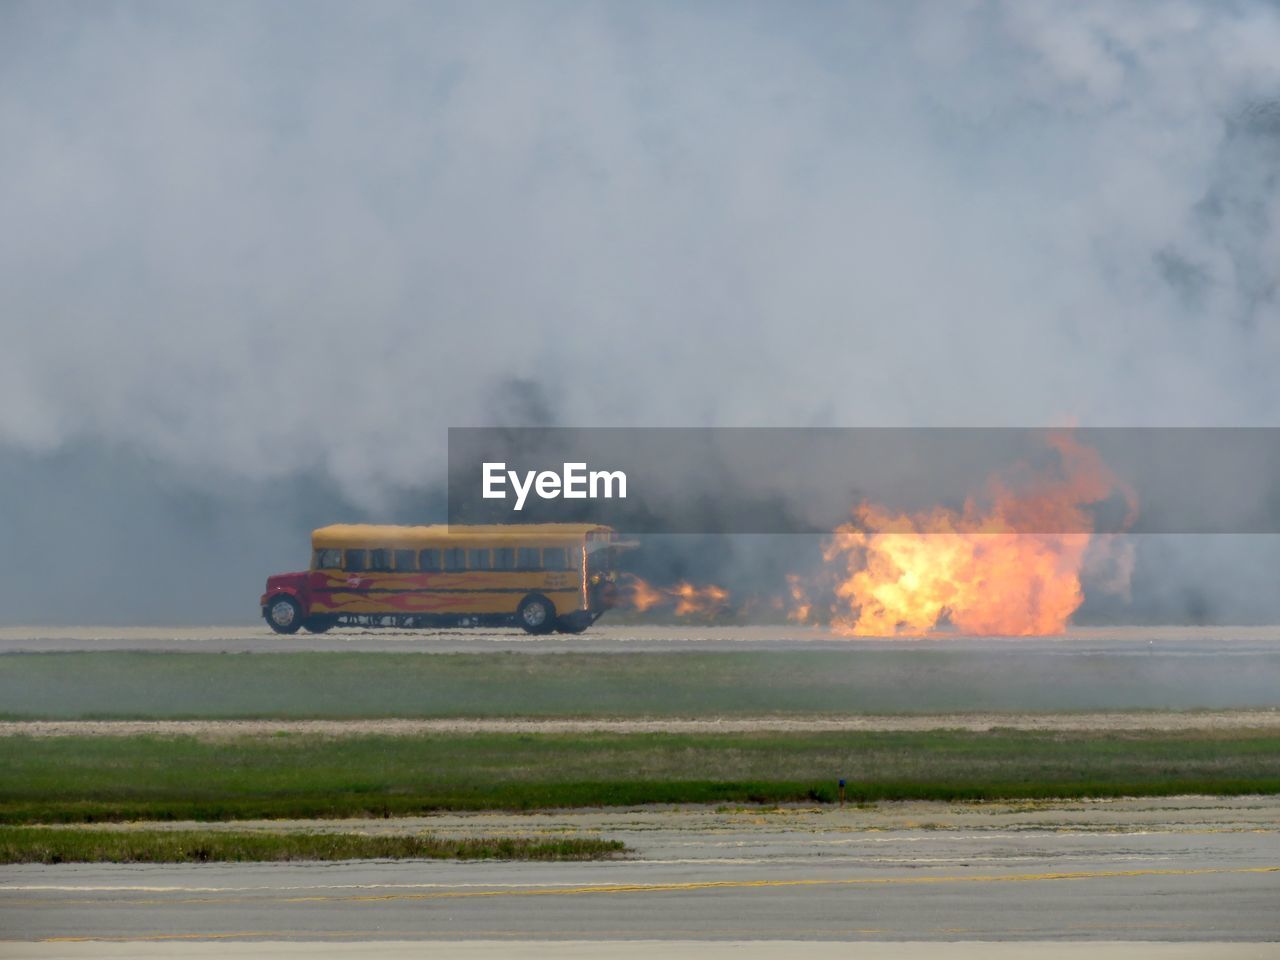 Jet engine school bus with flame and smoke on road